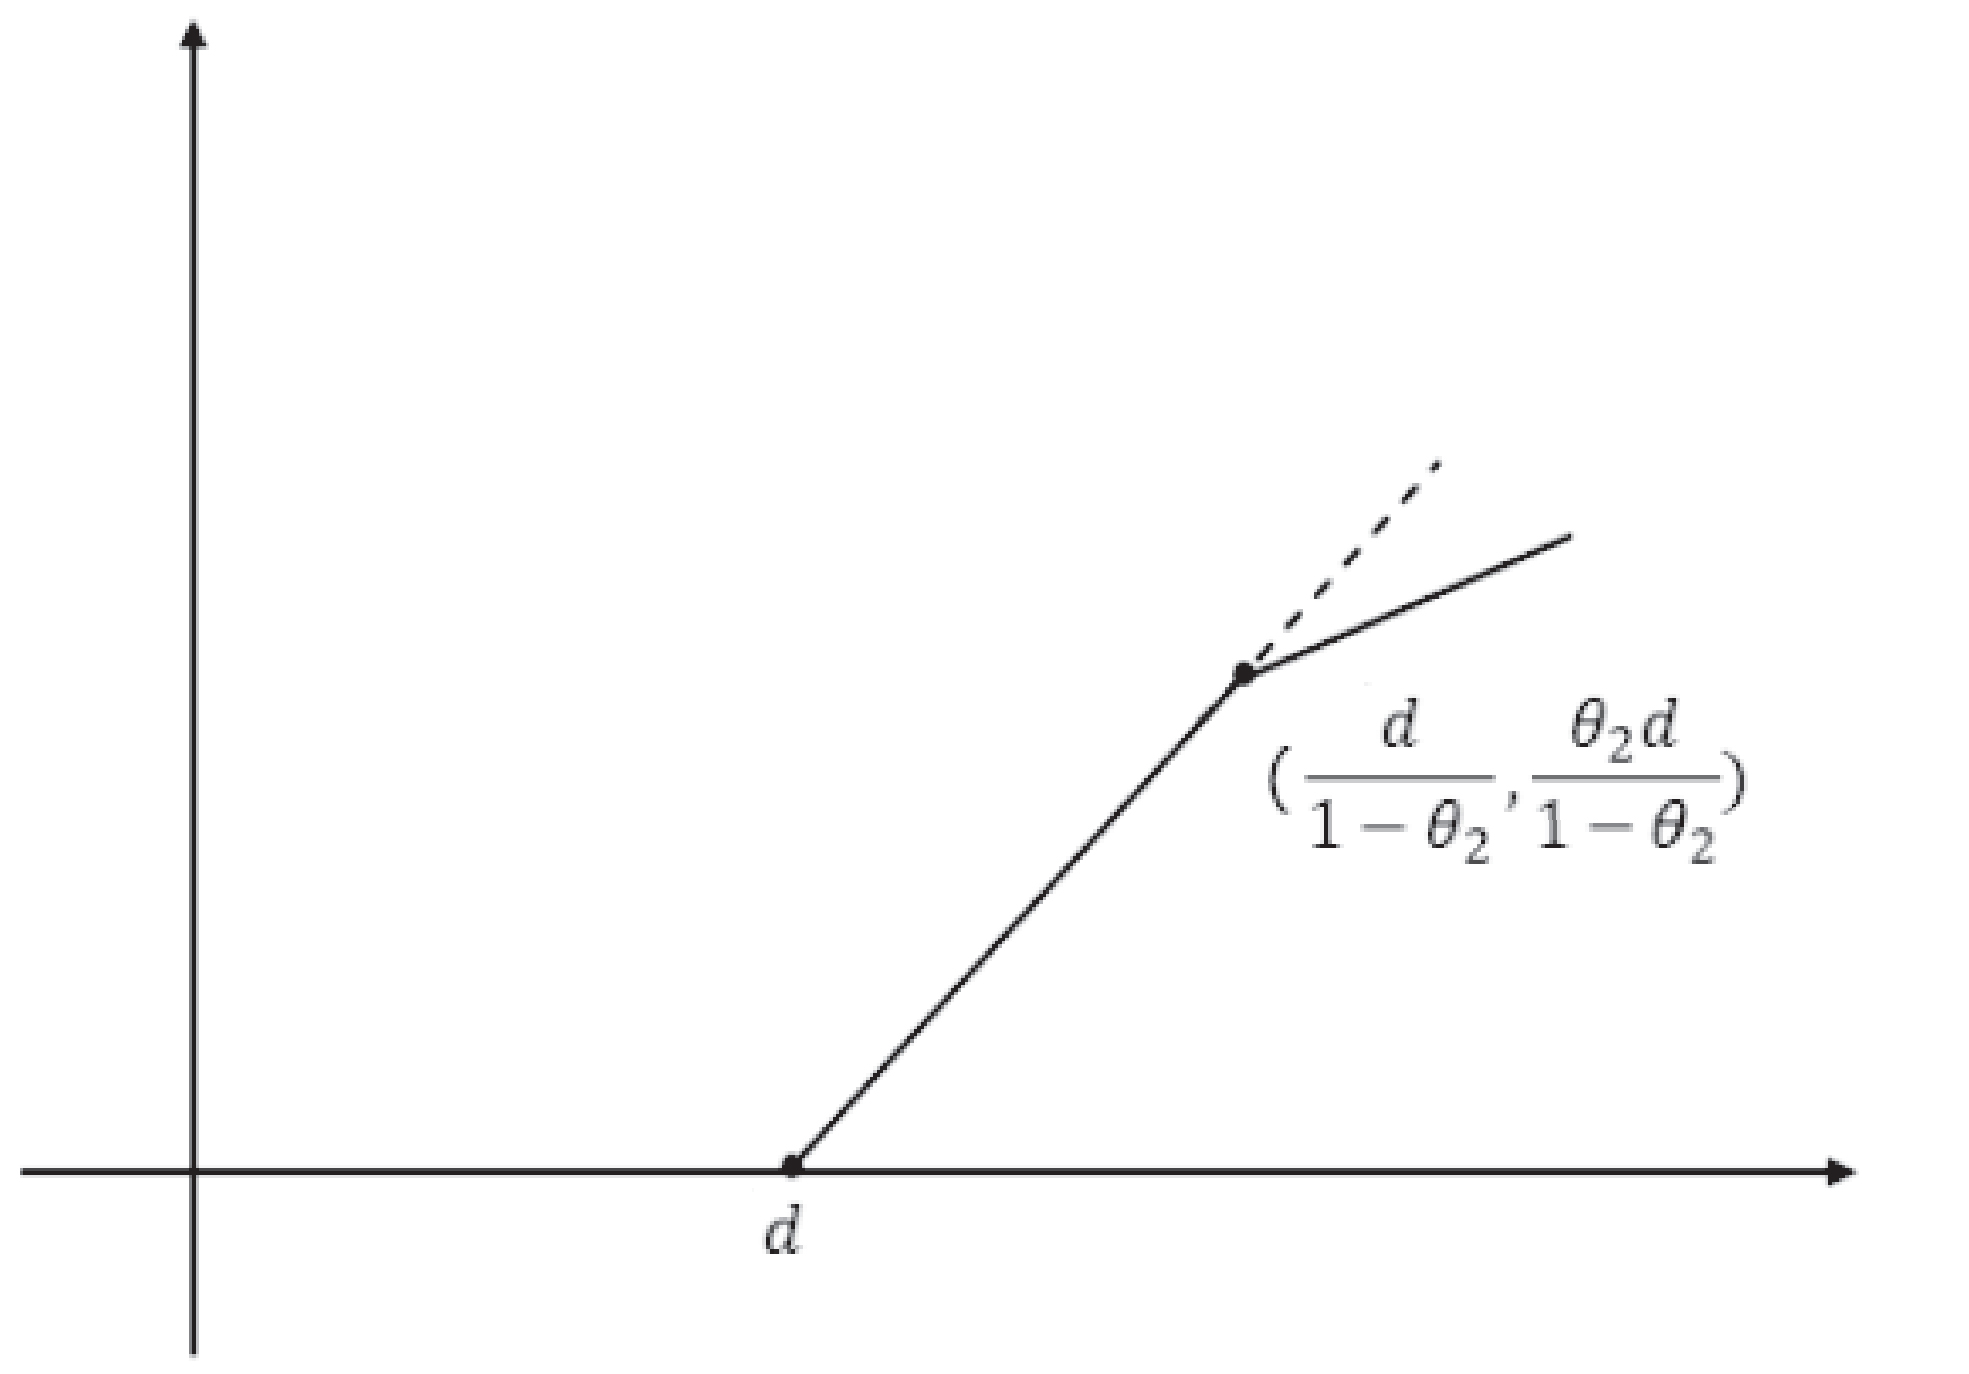 Graph of the function ... for theta sub 1=0, theta sub 2=0.4 and d=9.